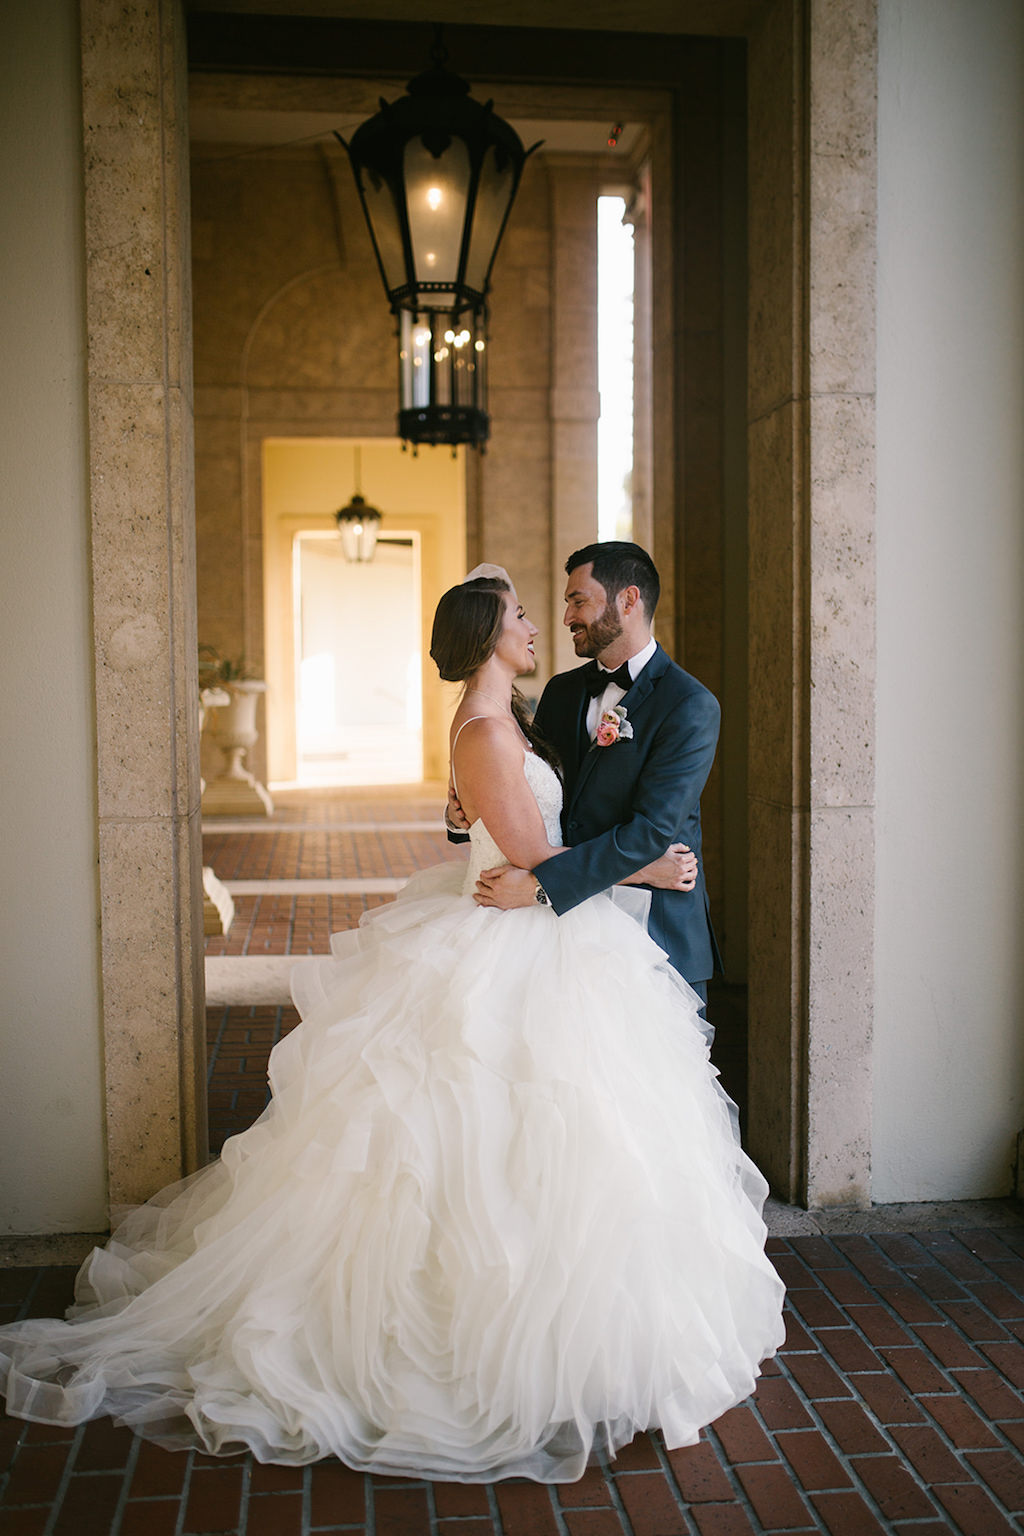 Florida Bride and Groom Outdoor First Look Wedding Portrait, Bride in Vera Wang Ballgown with Tulle and Organza Skirt, Fitted Beaded Bodice and Spaghetti Straps Wedding Dress